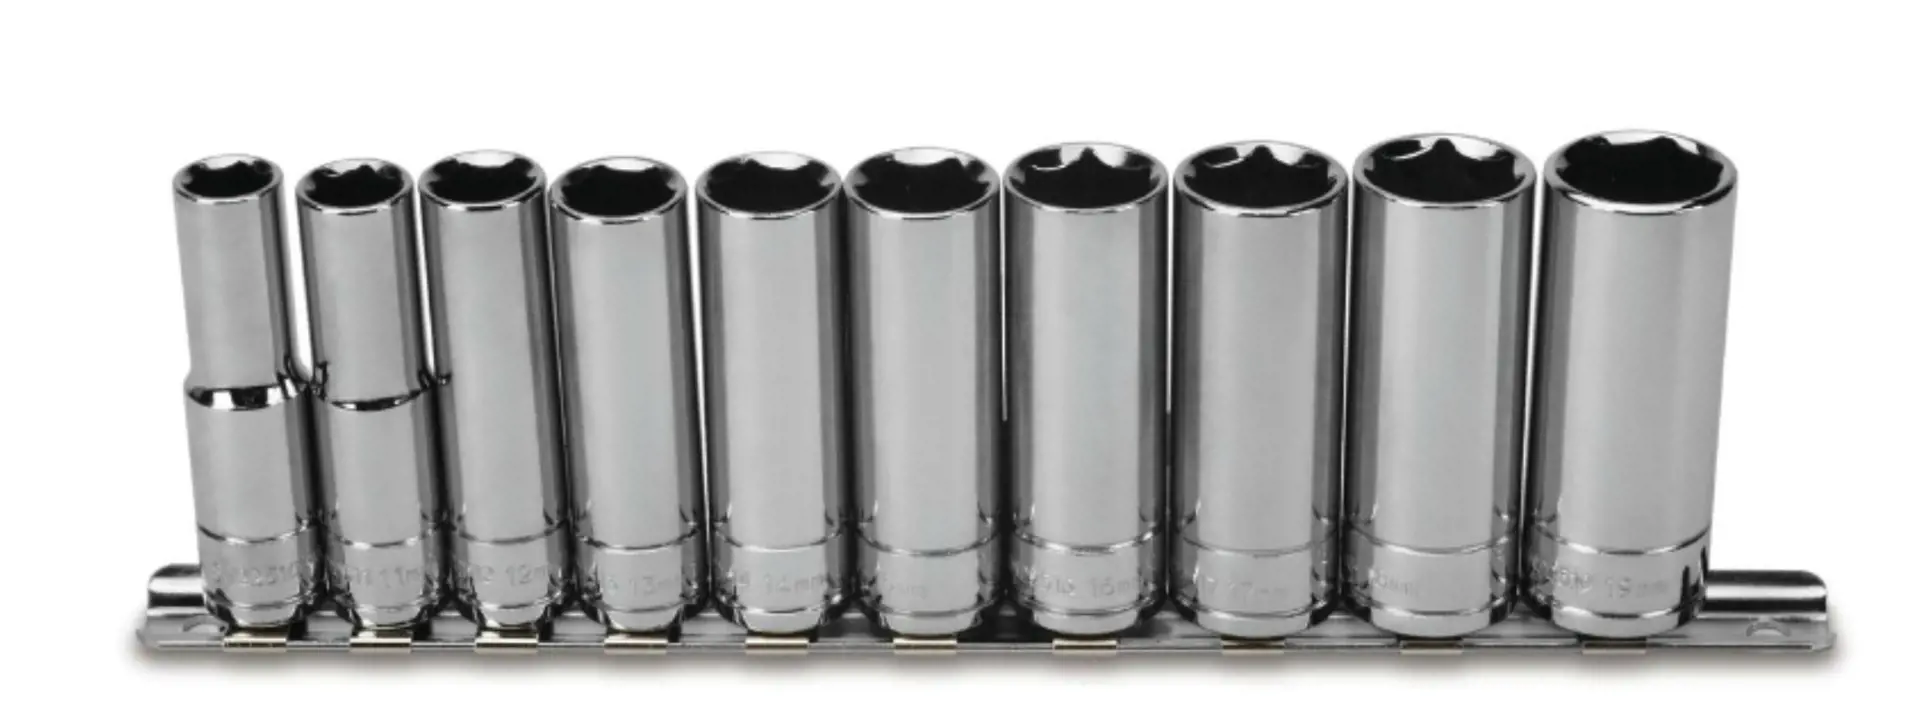 Image 1 for #SN22501 New Holland 3/8" Drive Deep 6 Point Socket Sets 10-Piece Socket Set(Metric)